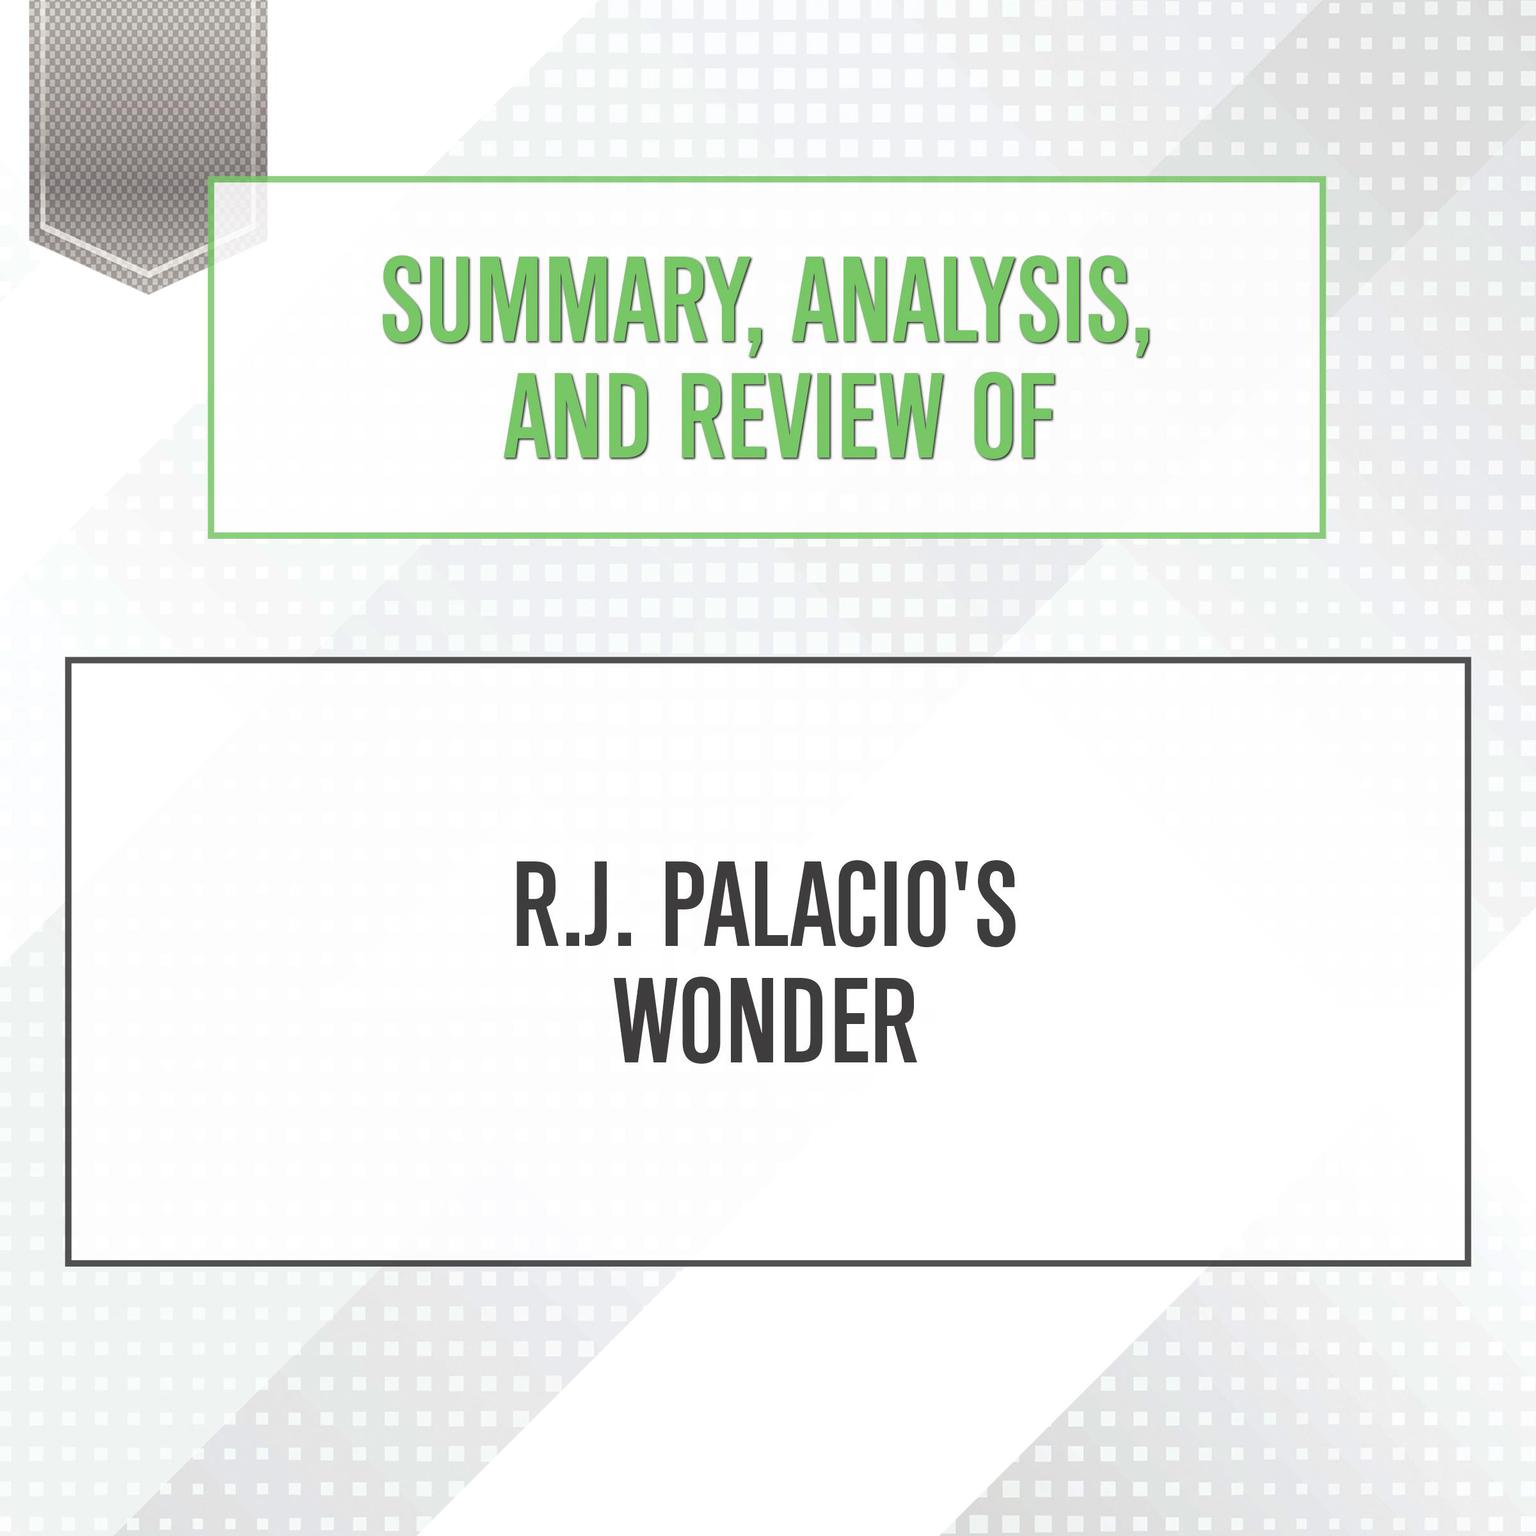 Summary, Analysis, and Review of R.J. Palacios Wonder Audiobook, by Start Publishing Notes